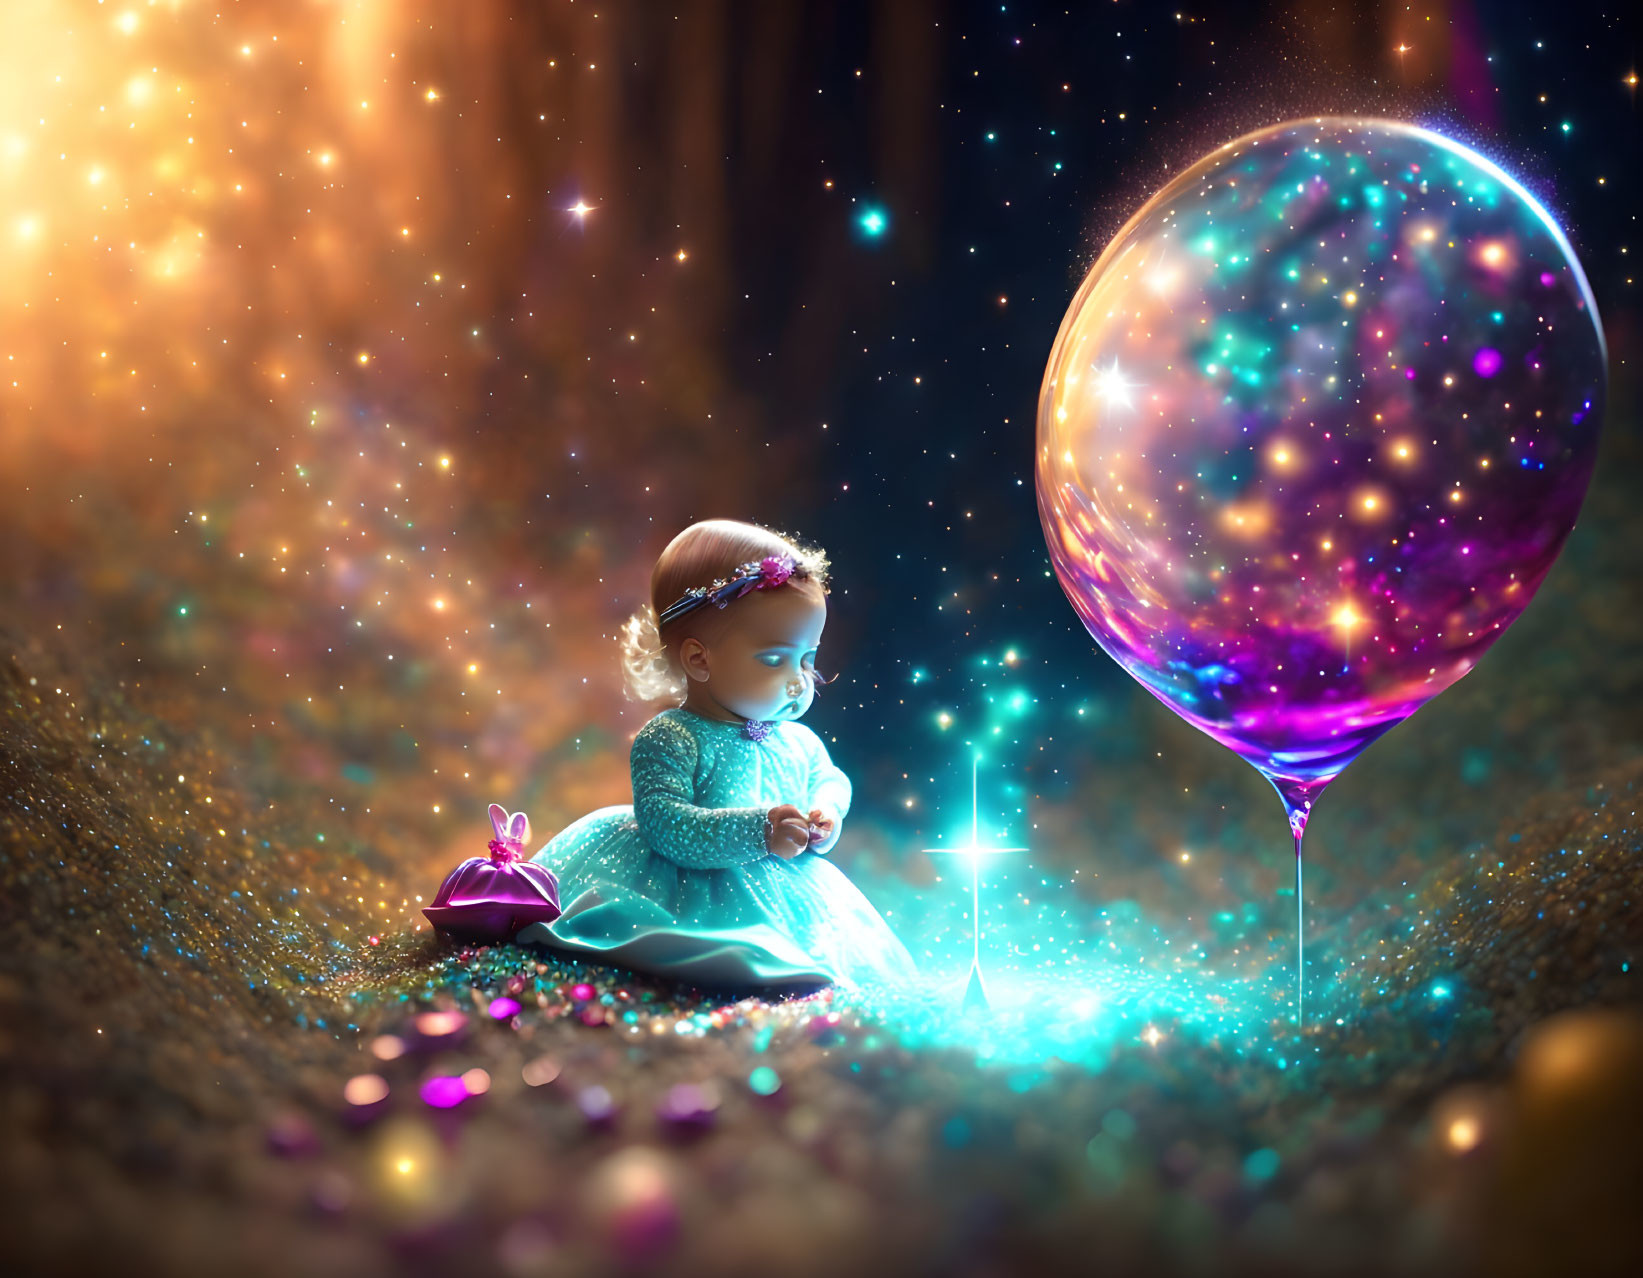 Child in blue dress admires luminous balloon in starry setting